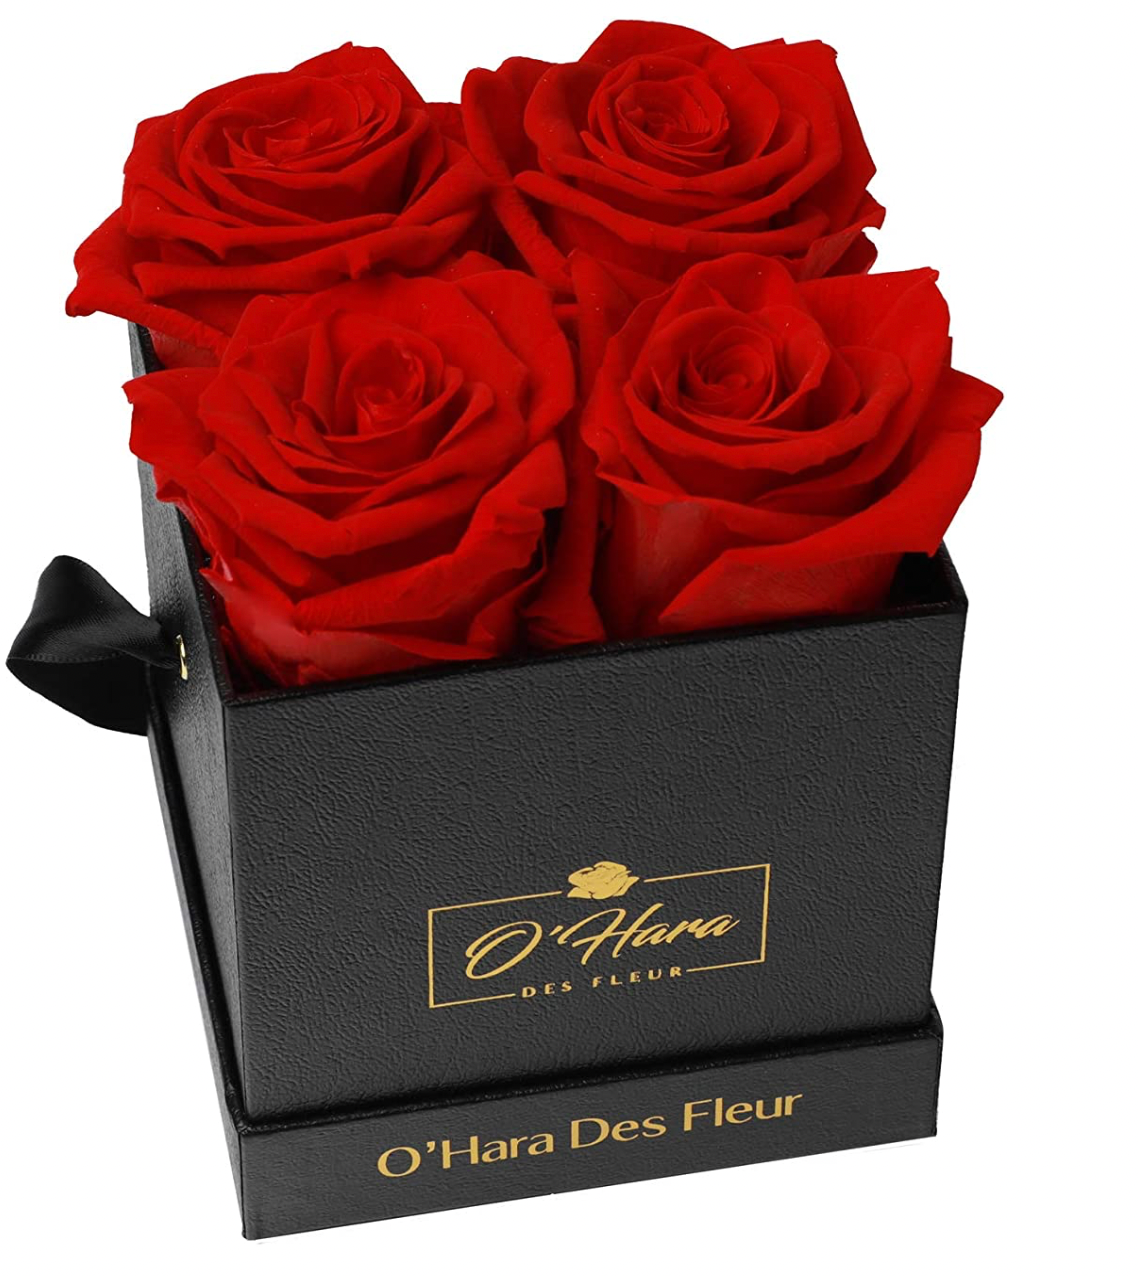 Preserved  Real Roses| Roses that last 1 year o more| Roses in a Box. O'Hara des Fleur